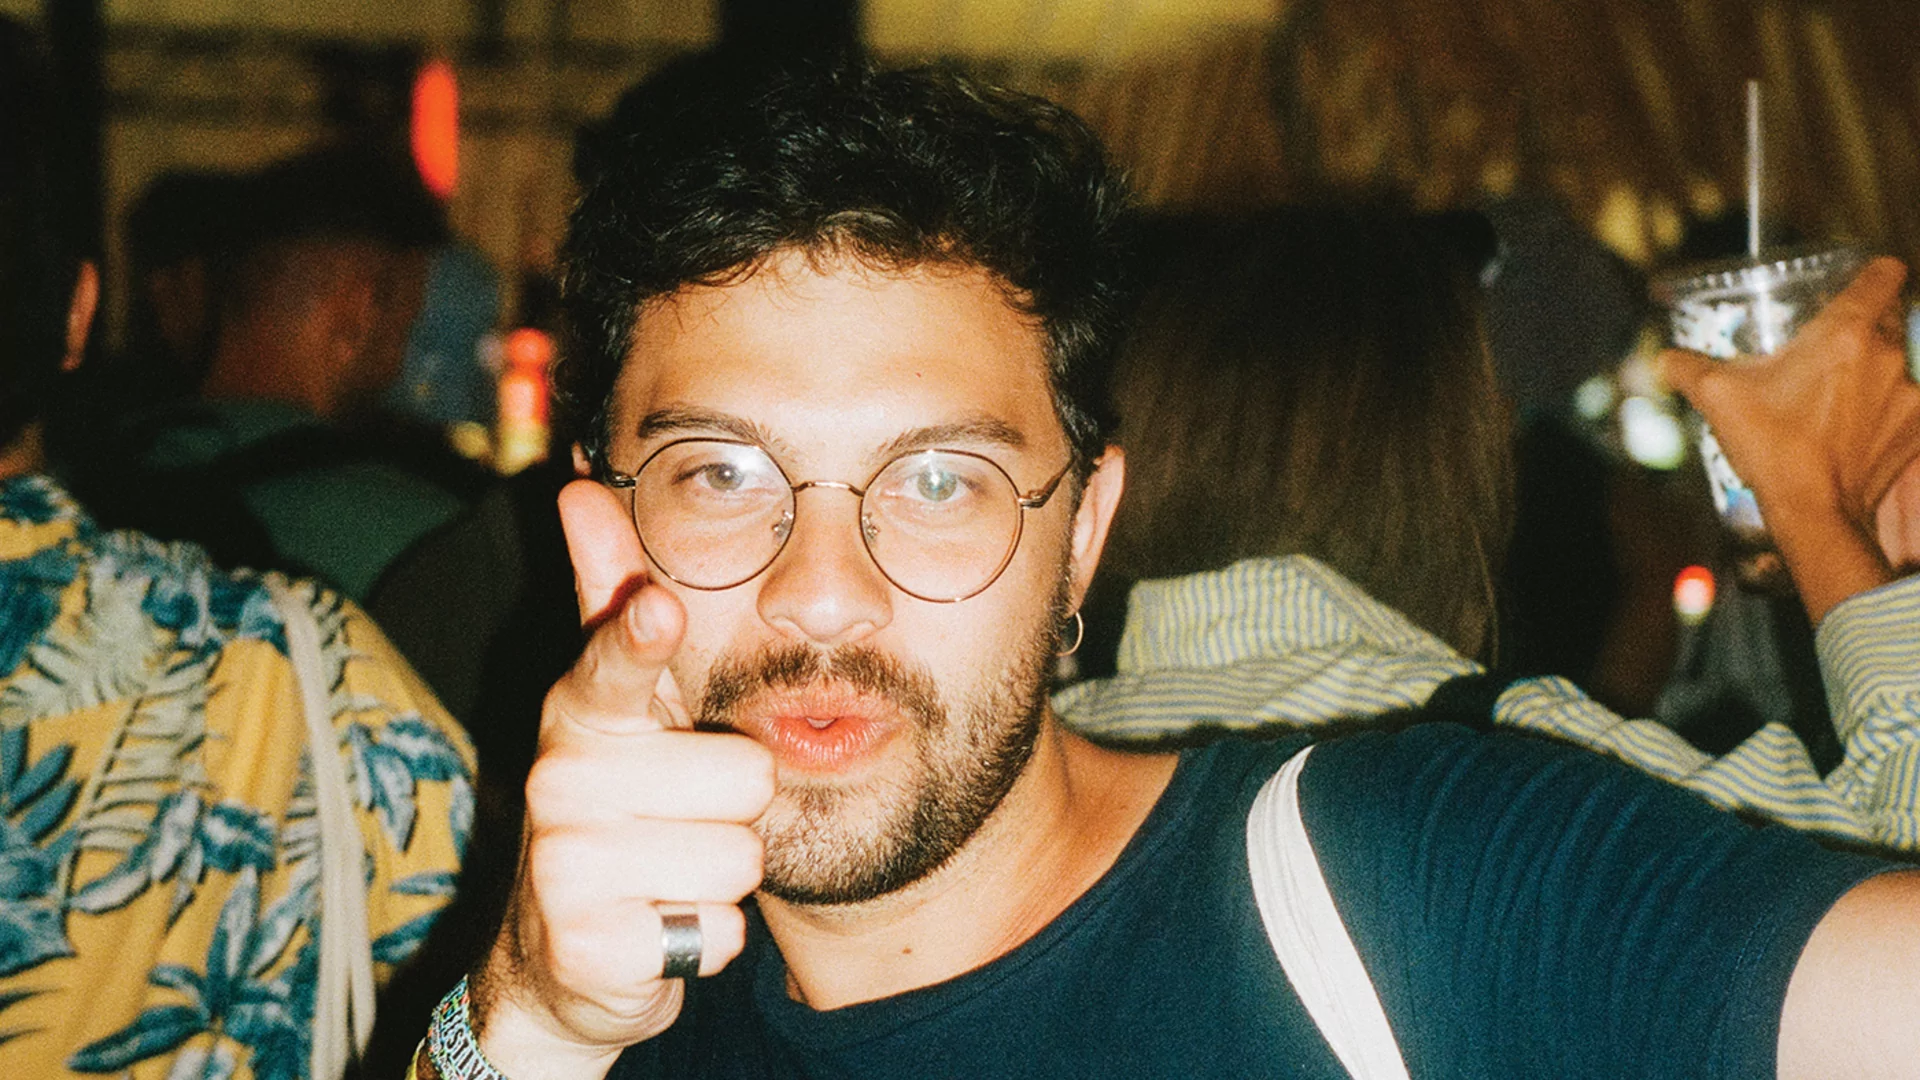 Nicolas Duque in glasses, dancing in a club will pointing at the camera